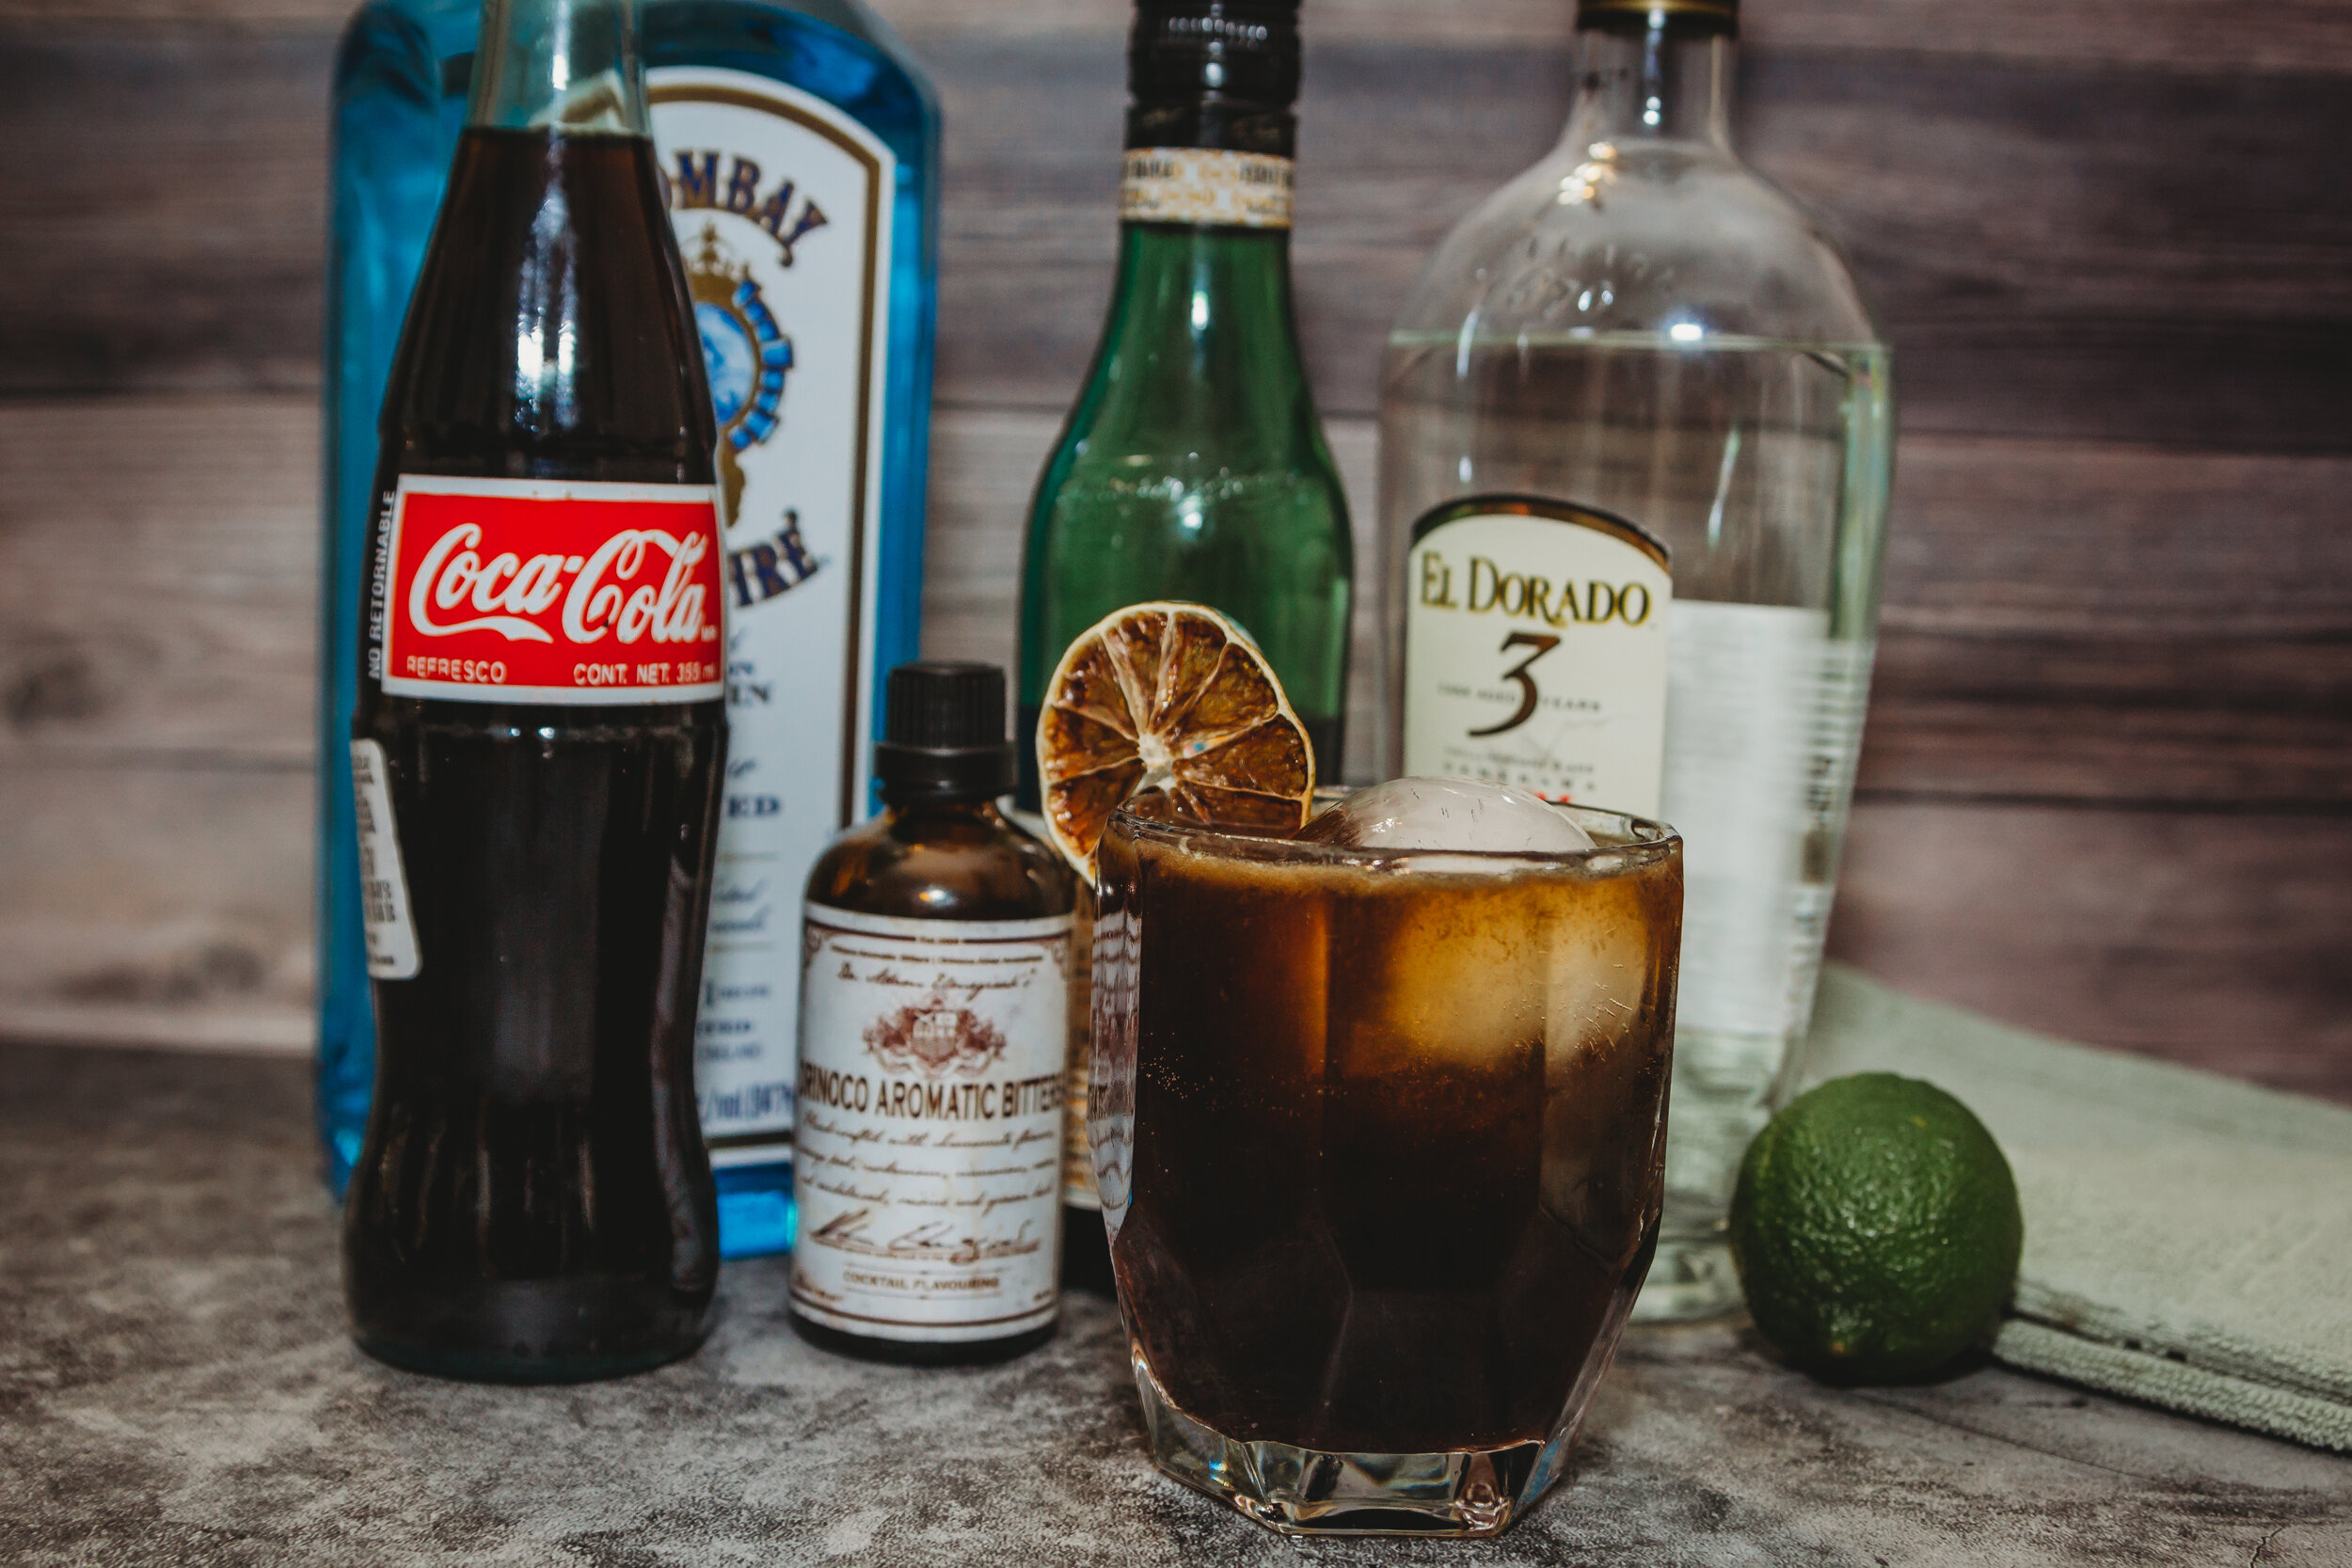 Classic Rum Drinks: How to Make a Cuba Libre (aka Rum and Coke) Cocktail, Cocktails